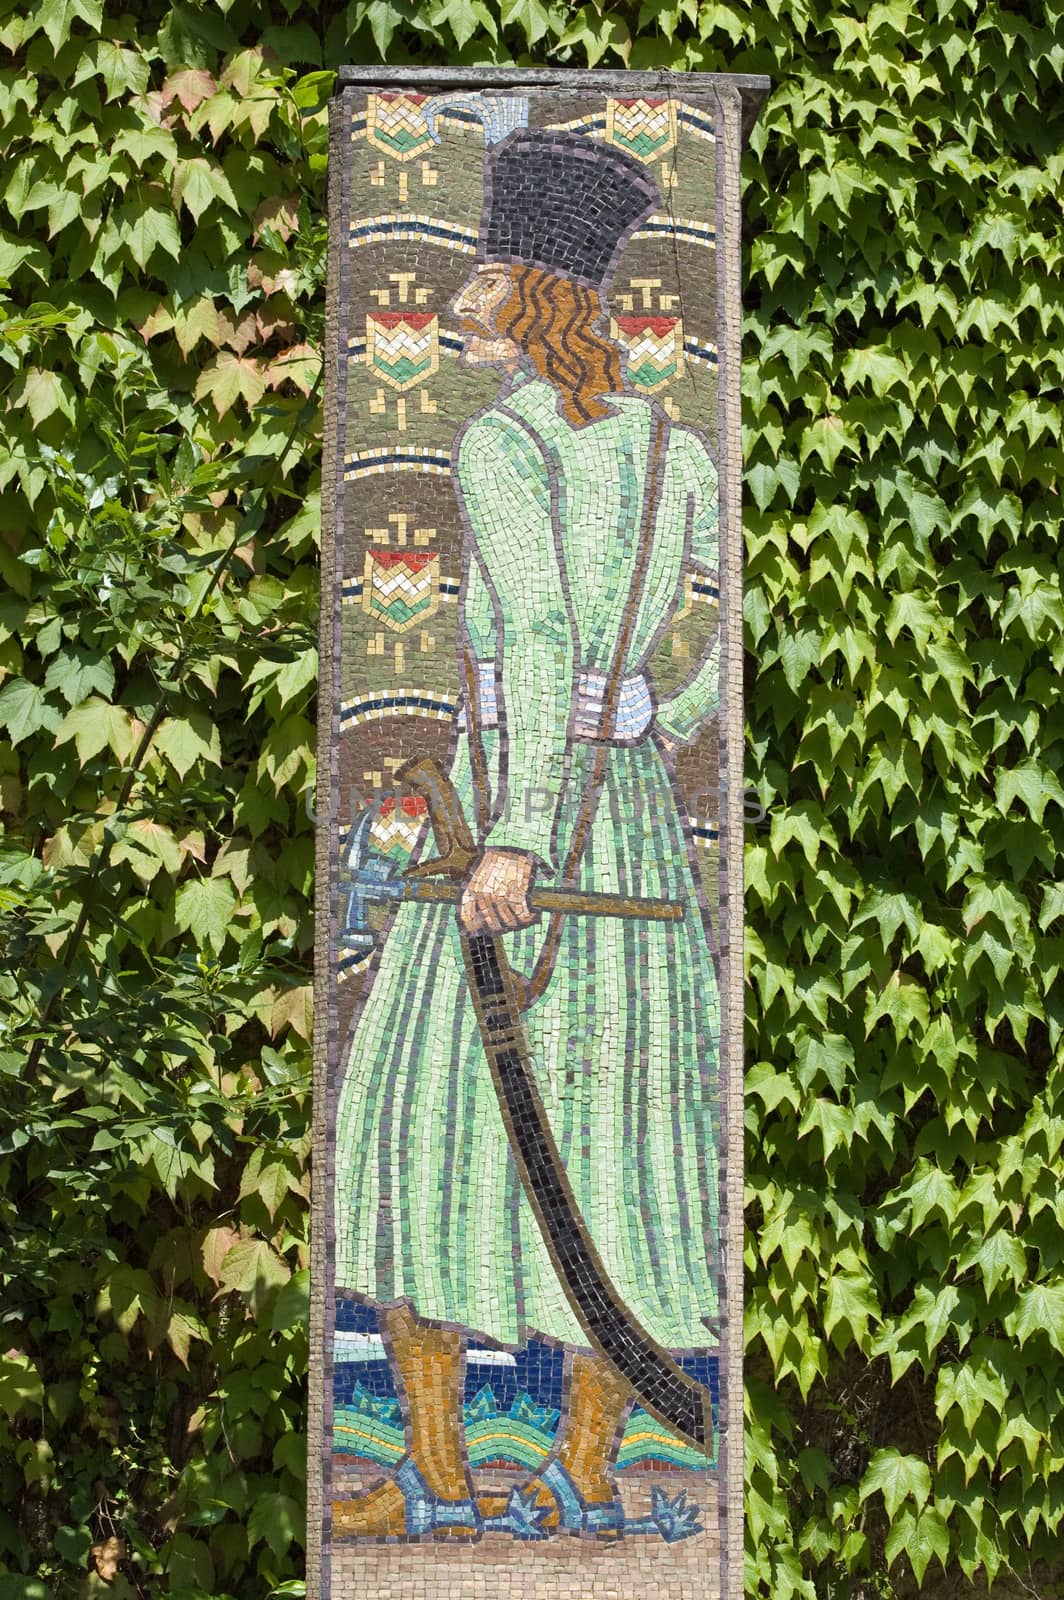 A full length mosaic of the Hungarian poet Balint Balassa (1554-1594), the founder of modern Hungarian lyric poetry. Monument on public display outside the Hungarian Pavilion in Giardini, Venice.